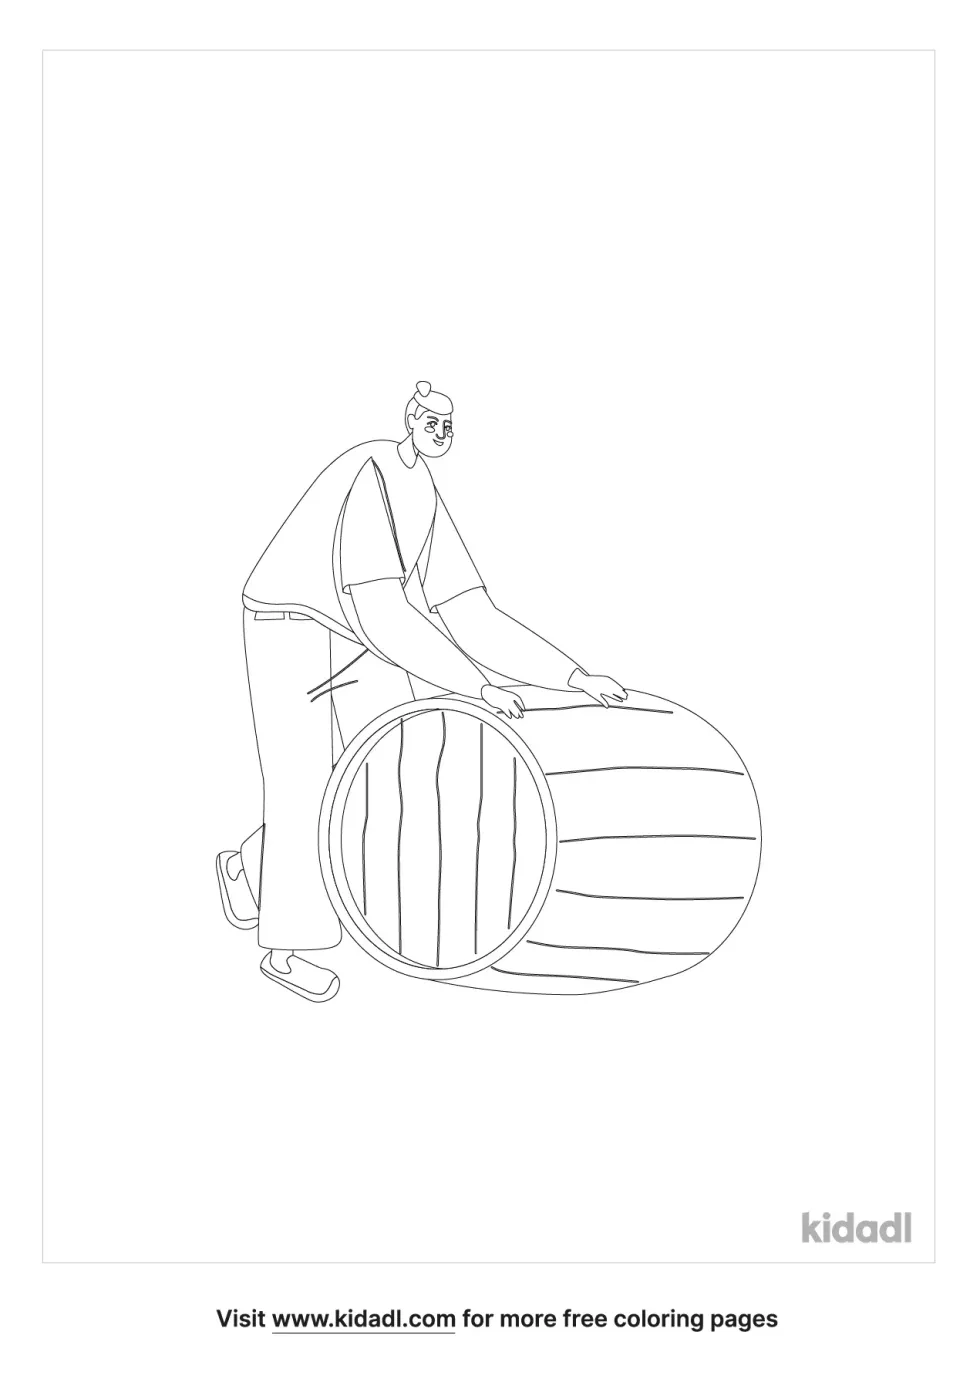 Barrel Rolling Coloring Page